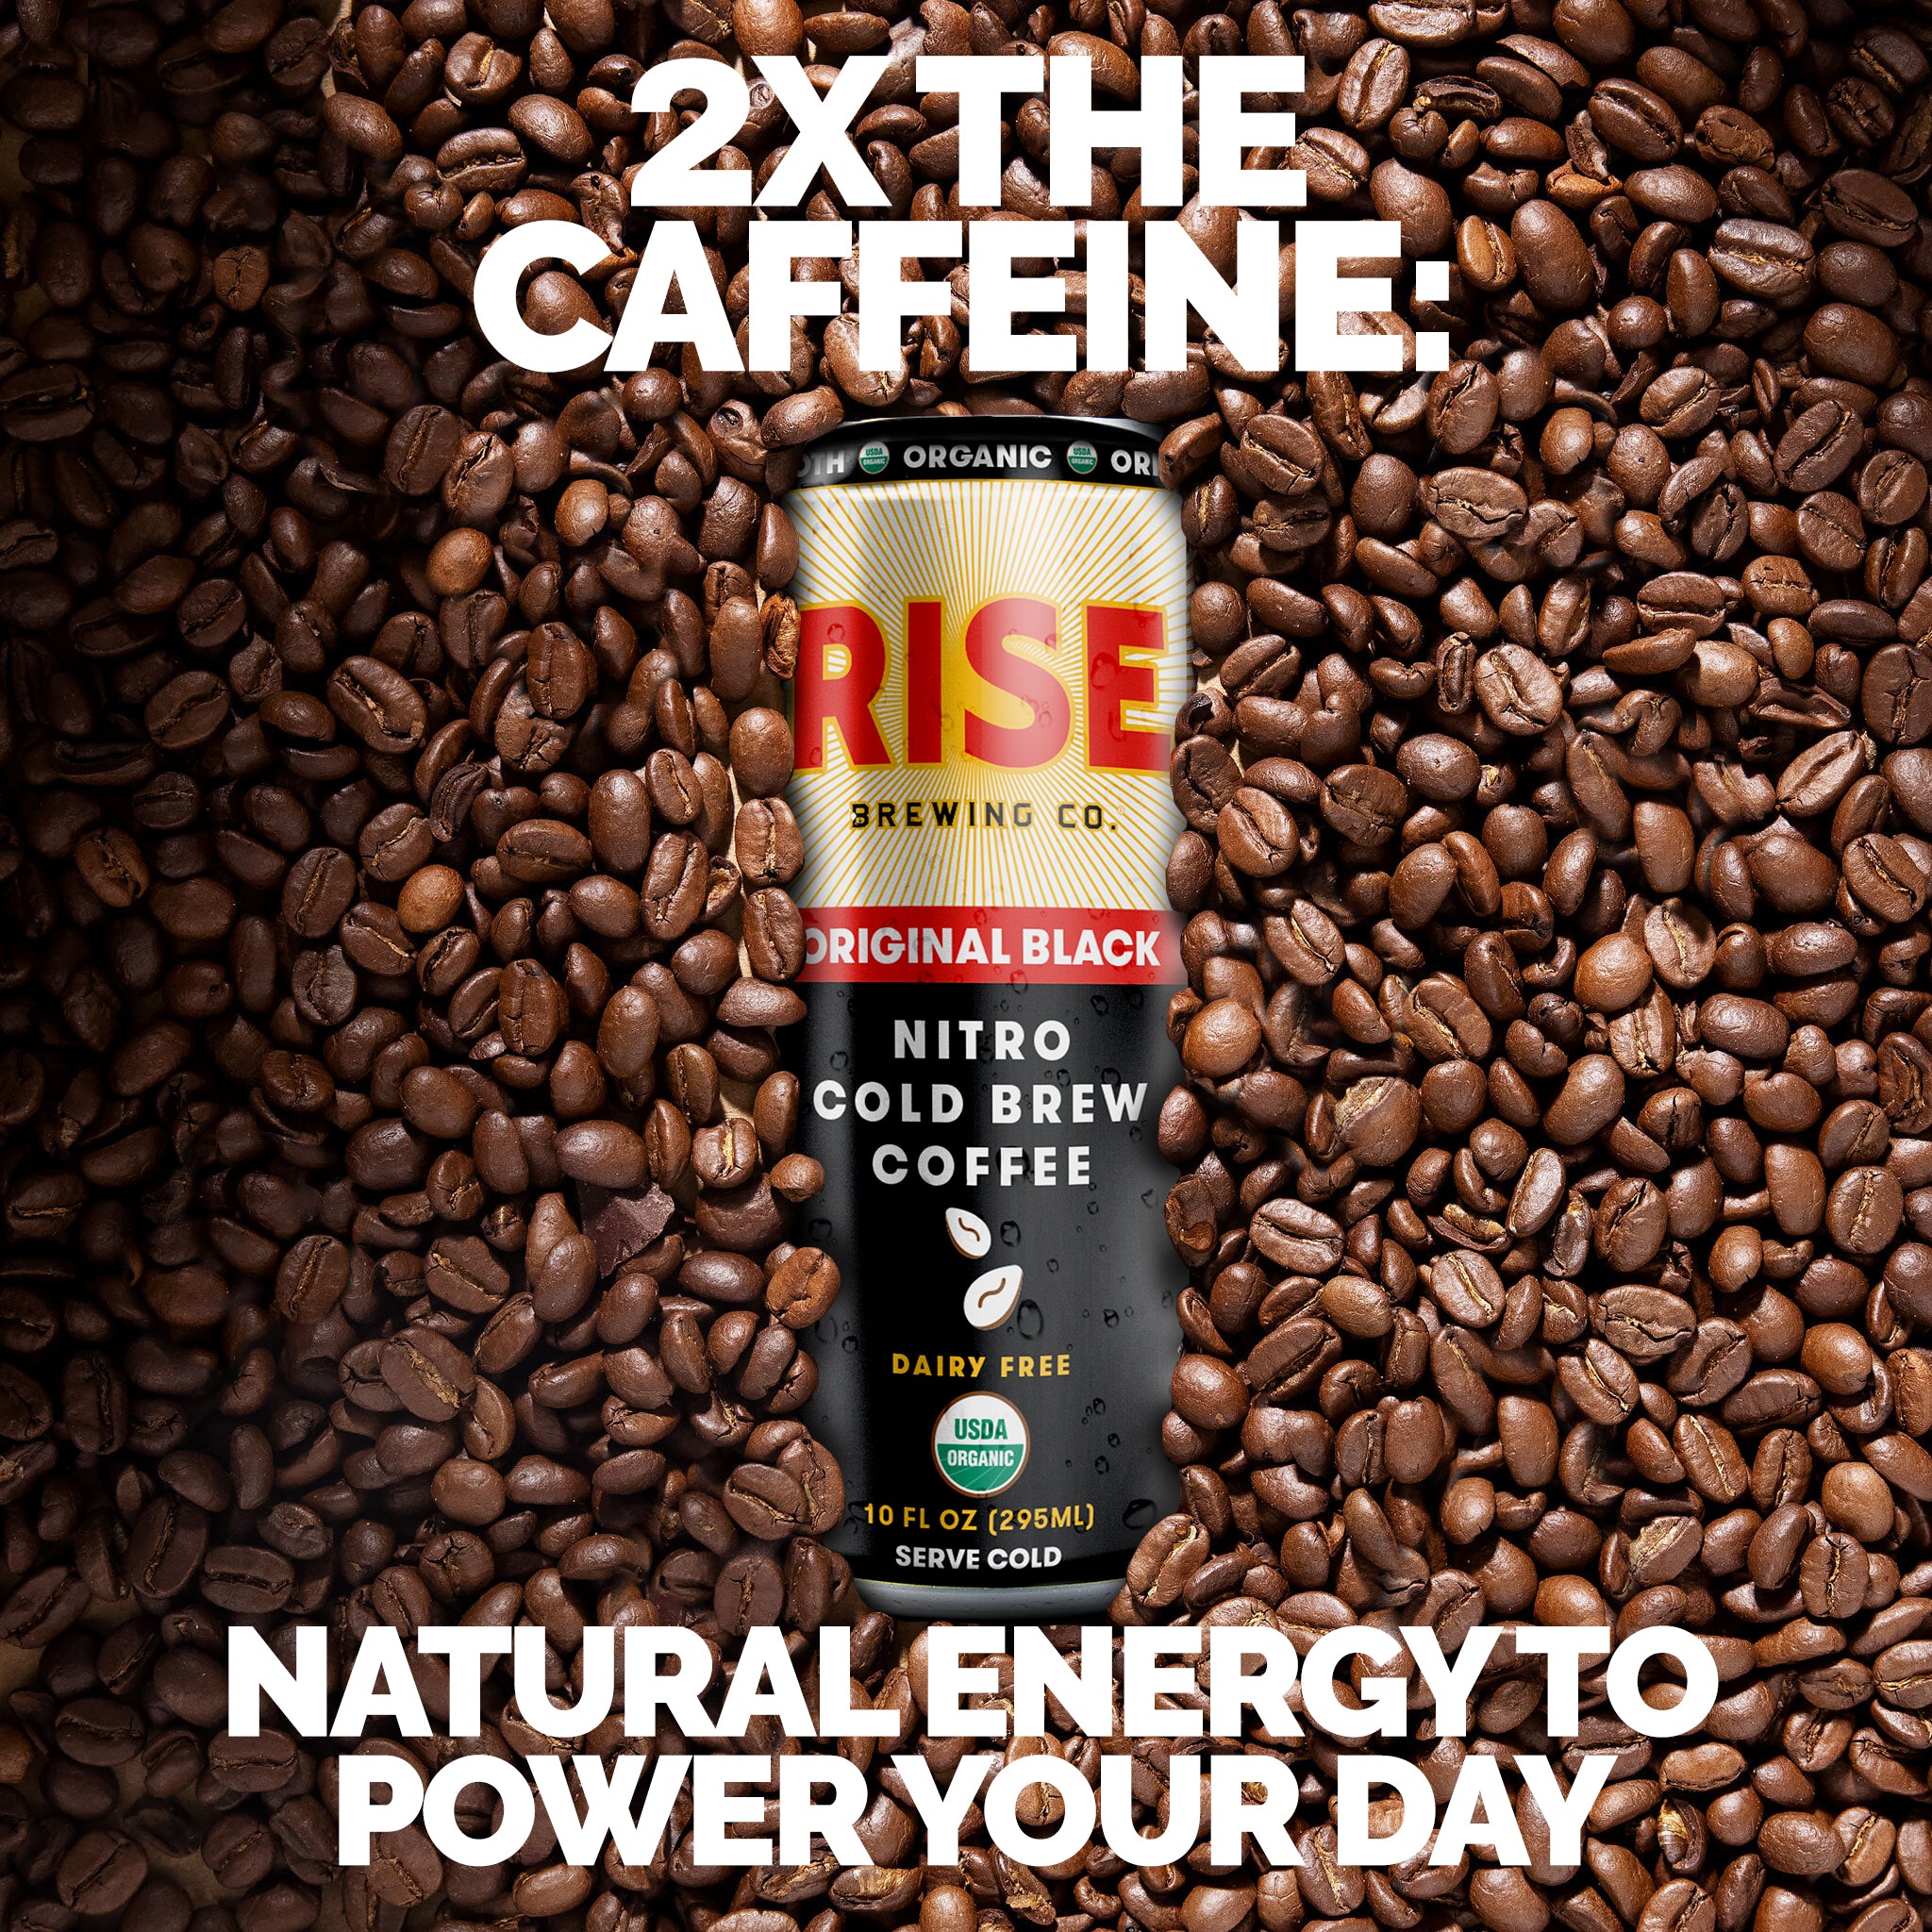 2x the caffeine: natural energy to power your day. RISE Brewing Co. 